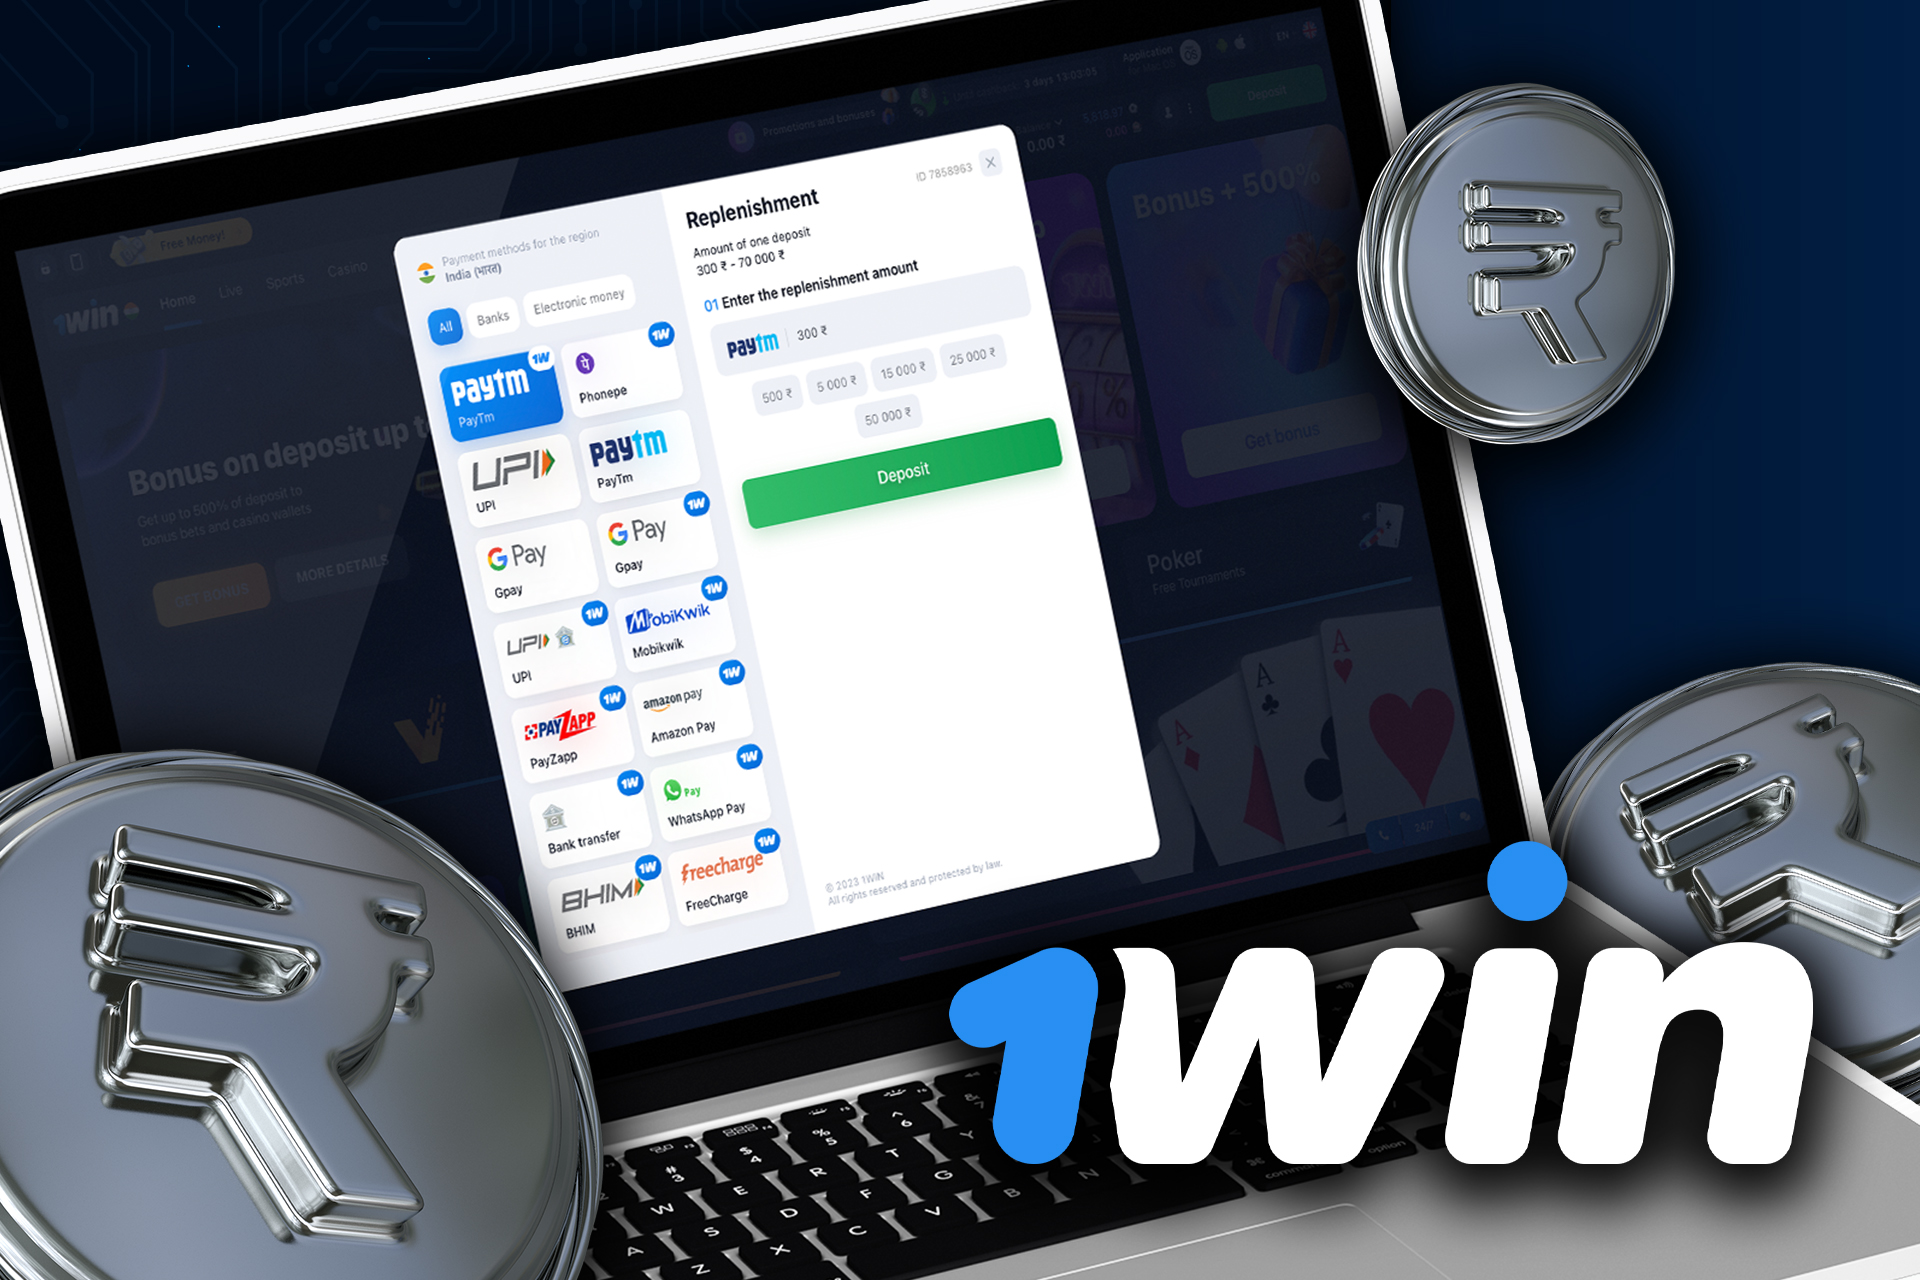 Choose one of the payment methods to deposit and withdraw money from the 1win casino.